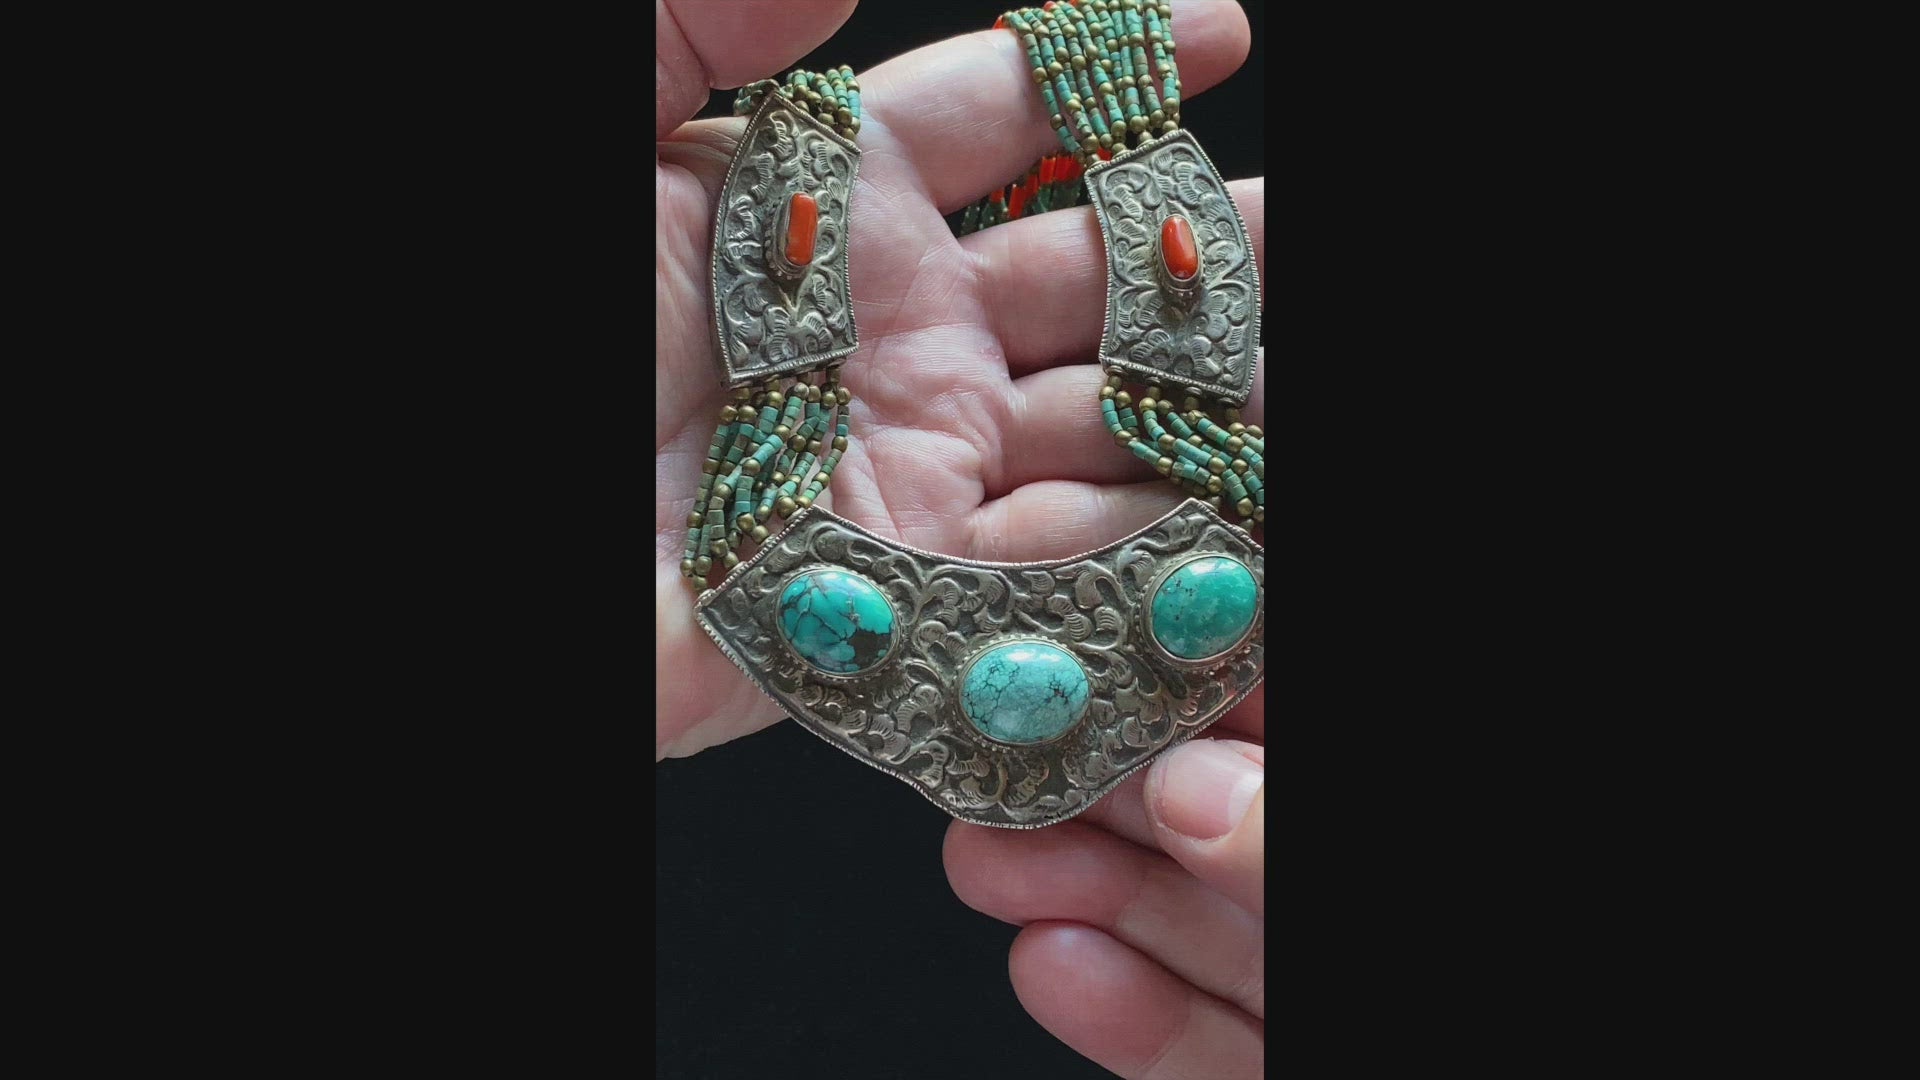 Old Silver, Coral & Turquoise Necklace | Vintage Ethnic Jewellery